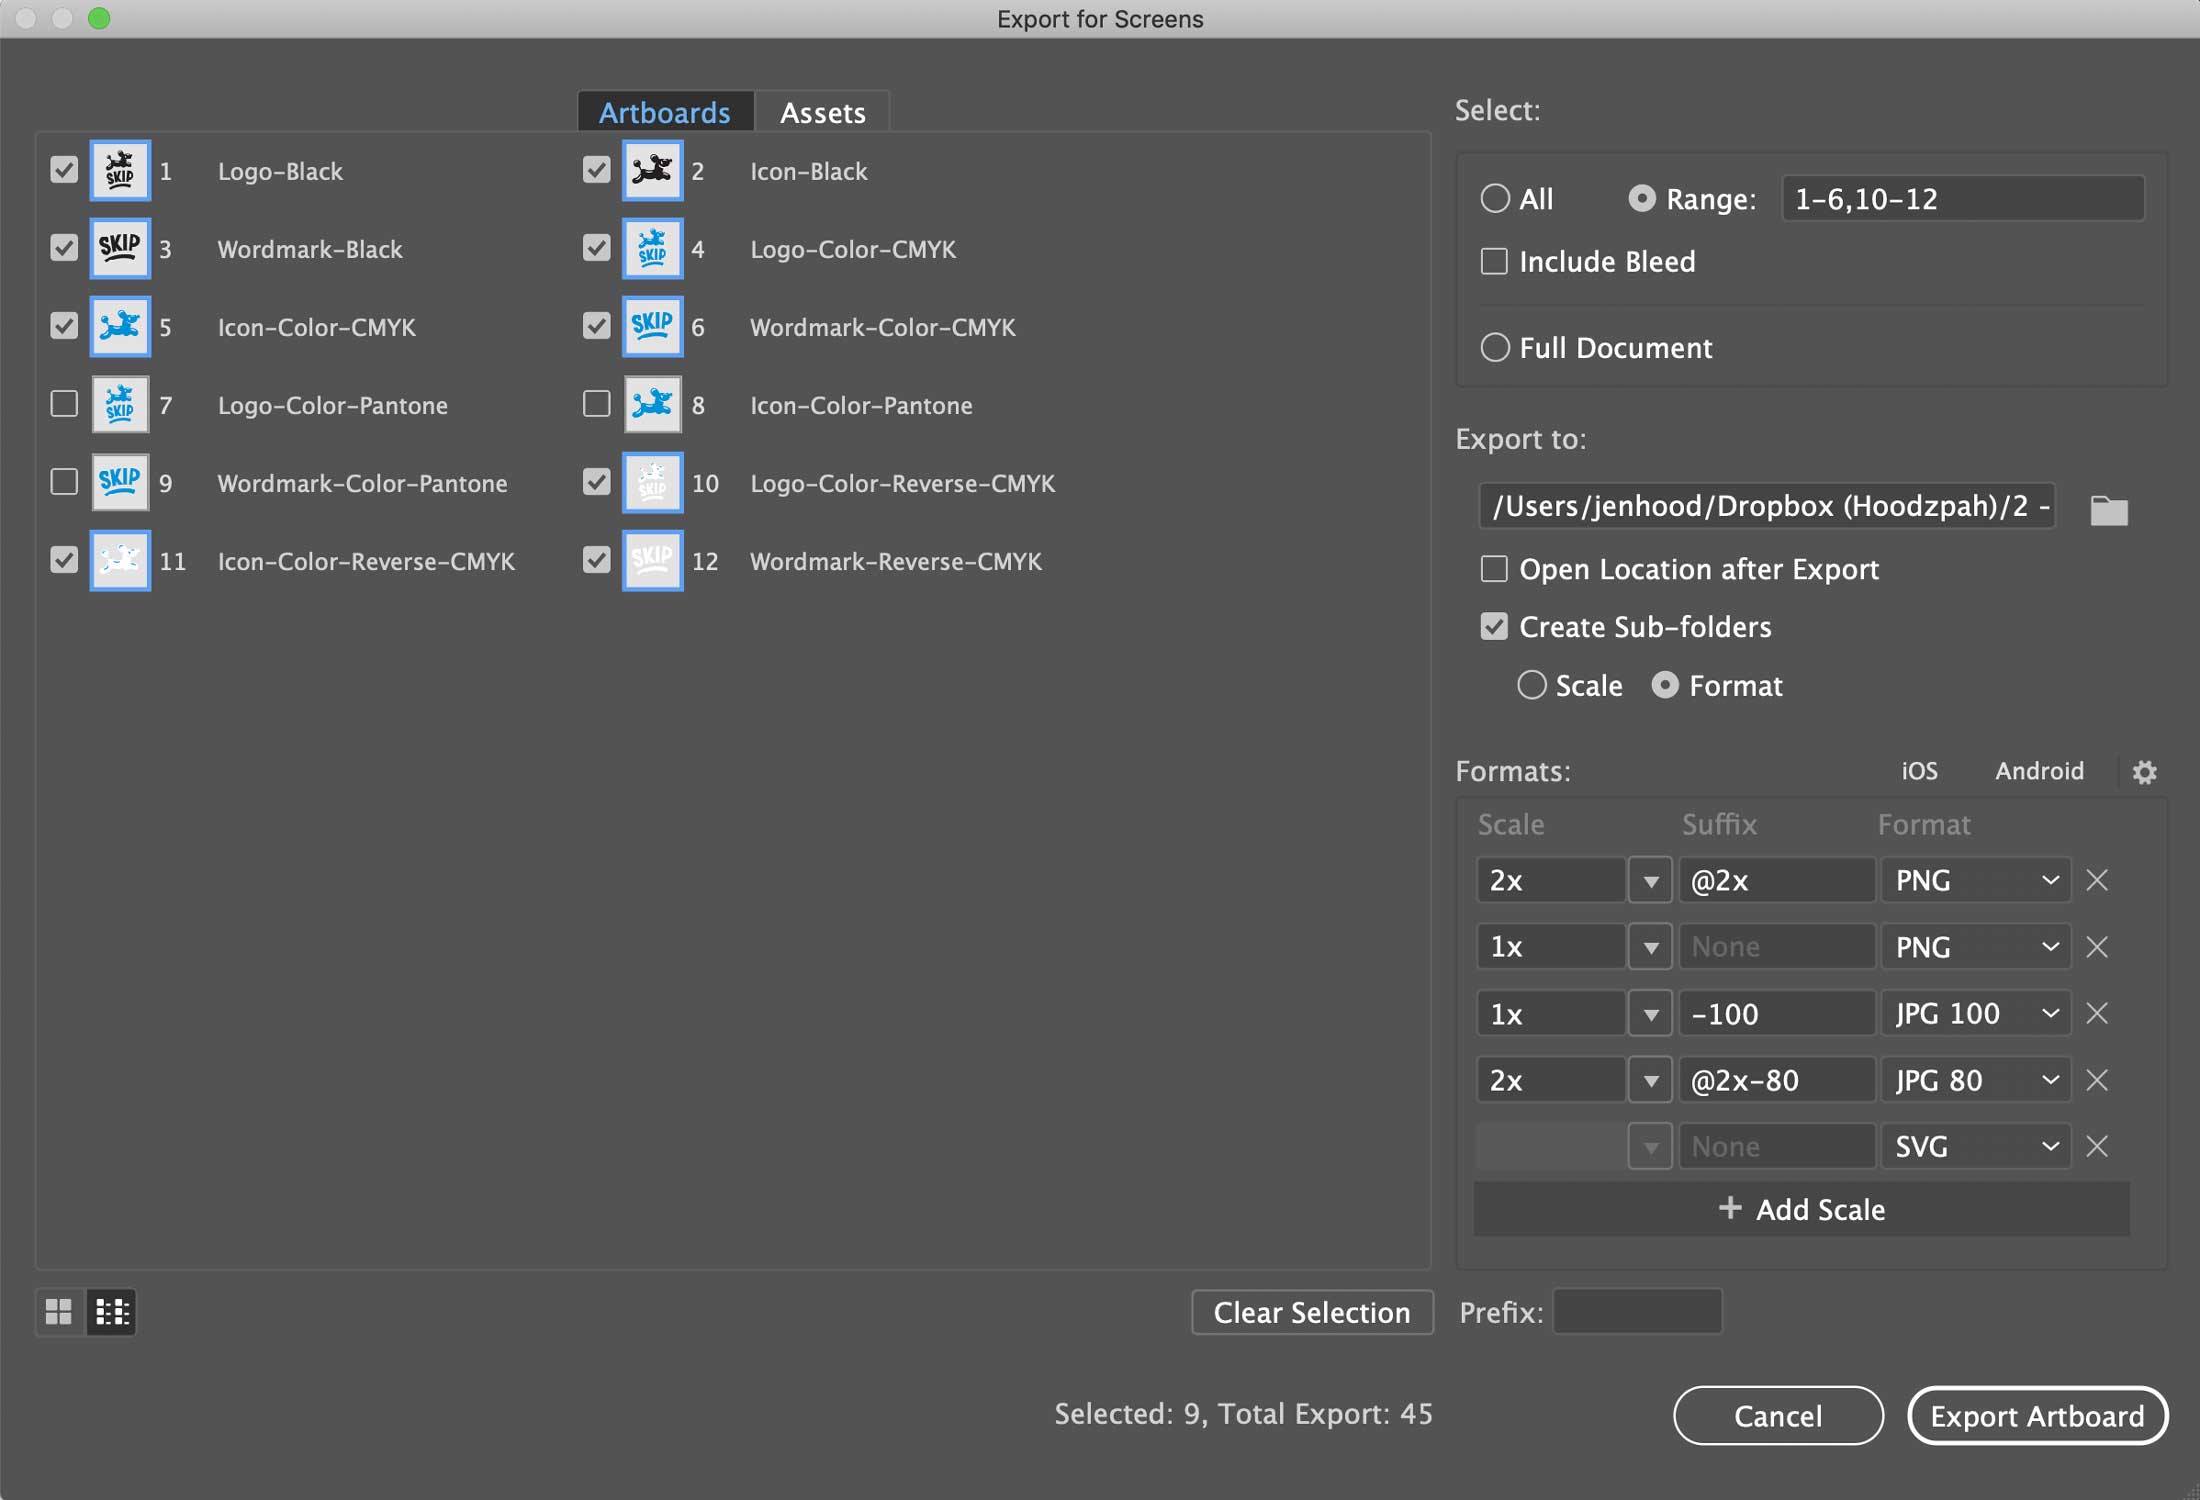 The "Export for Screens" dialog box in Illustrator. 